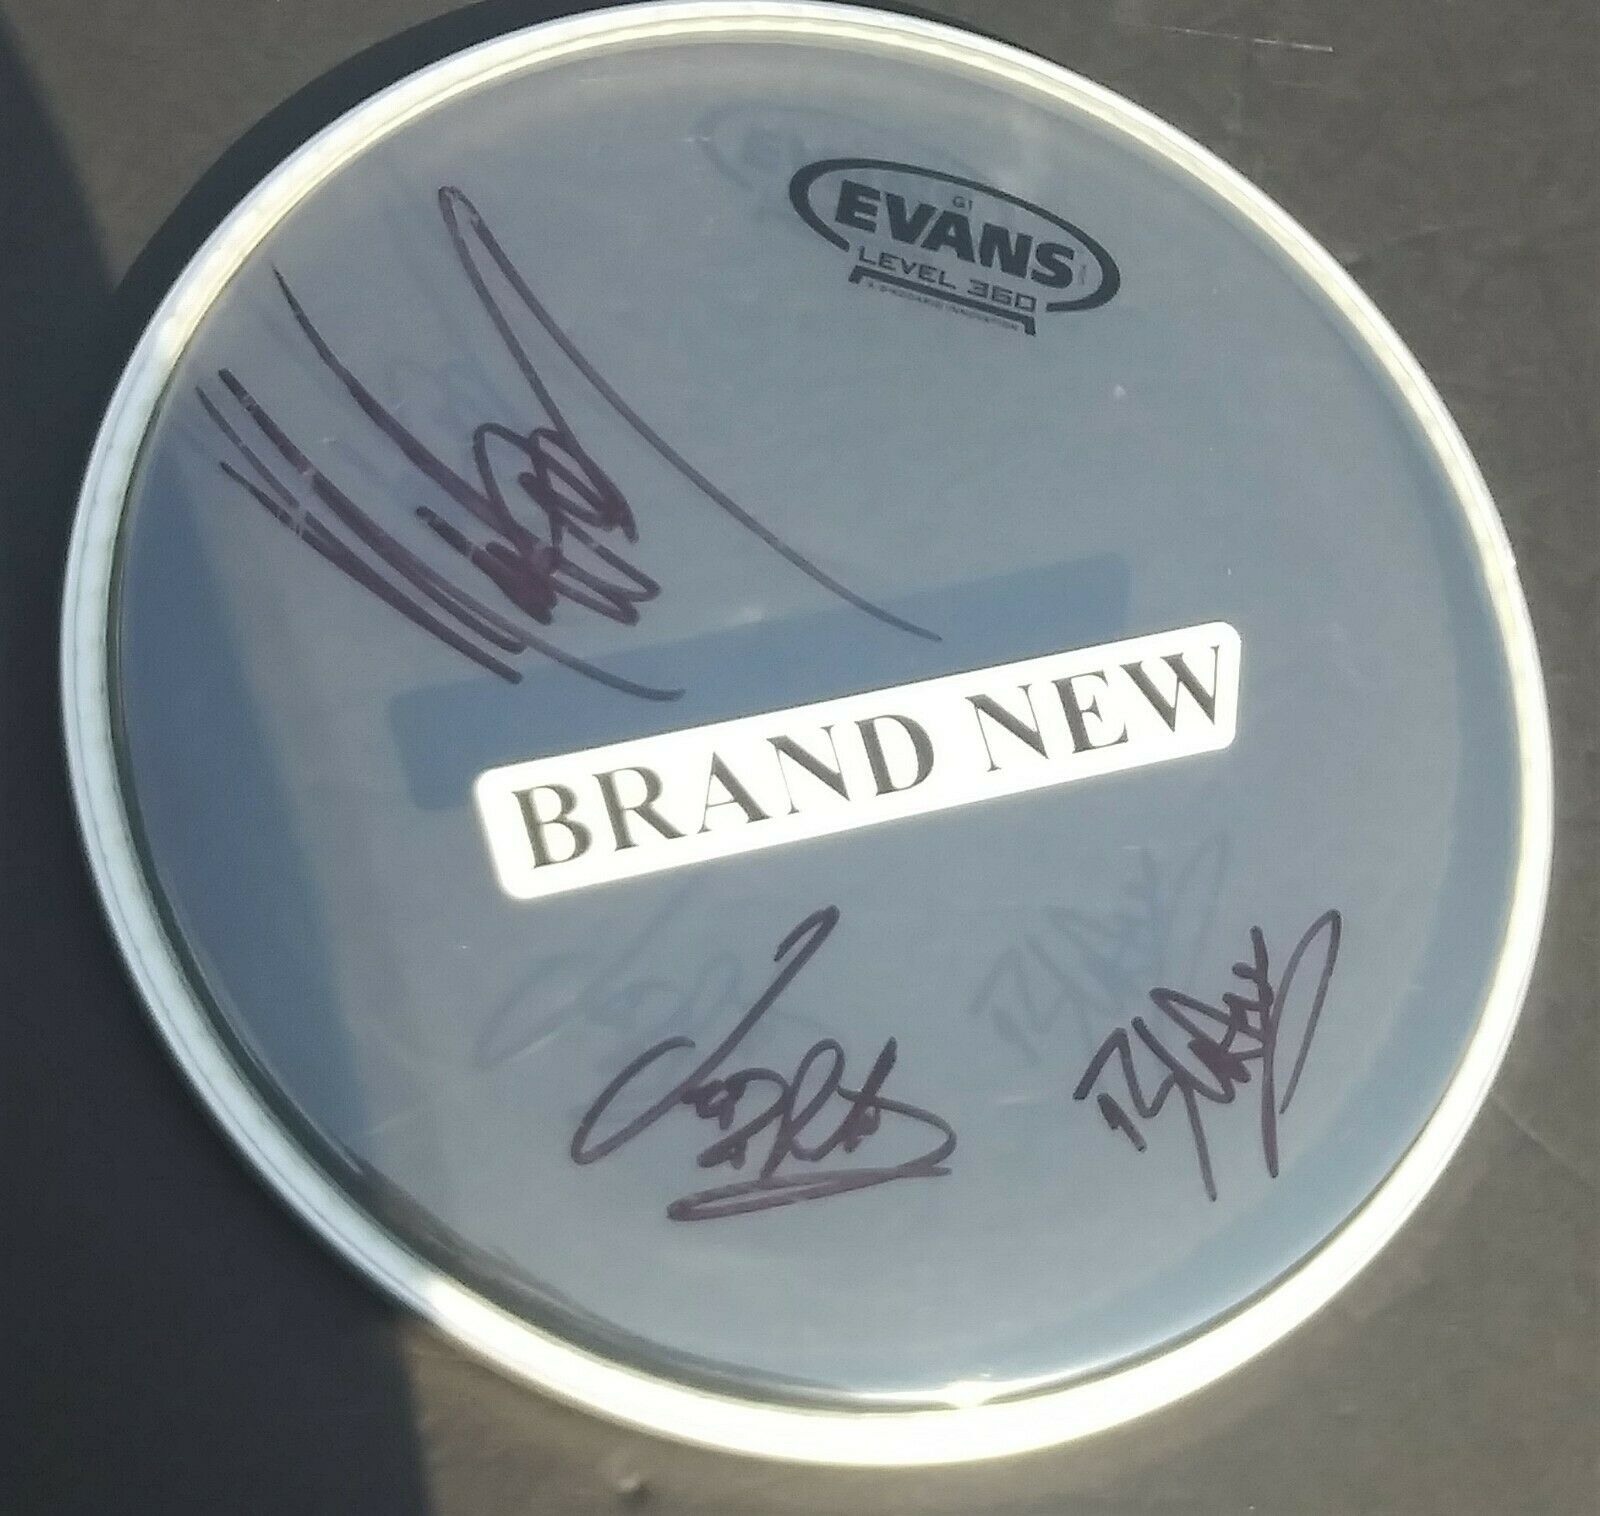 Brand New The Devil And God Are Raging Inside Me Signed 10" Evans Drumhead